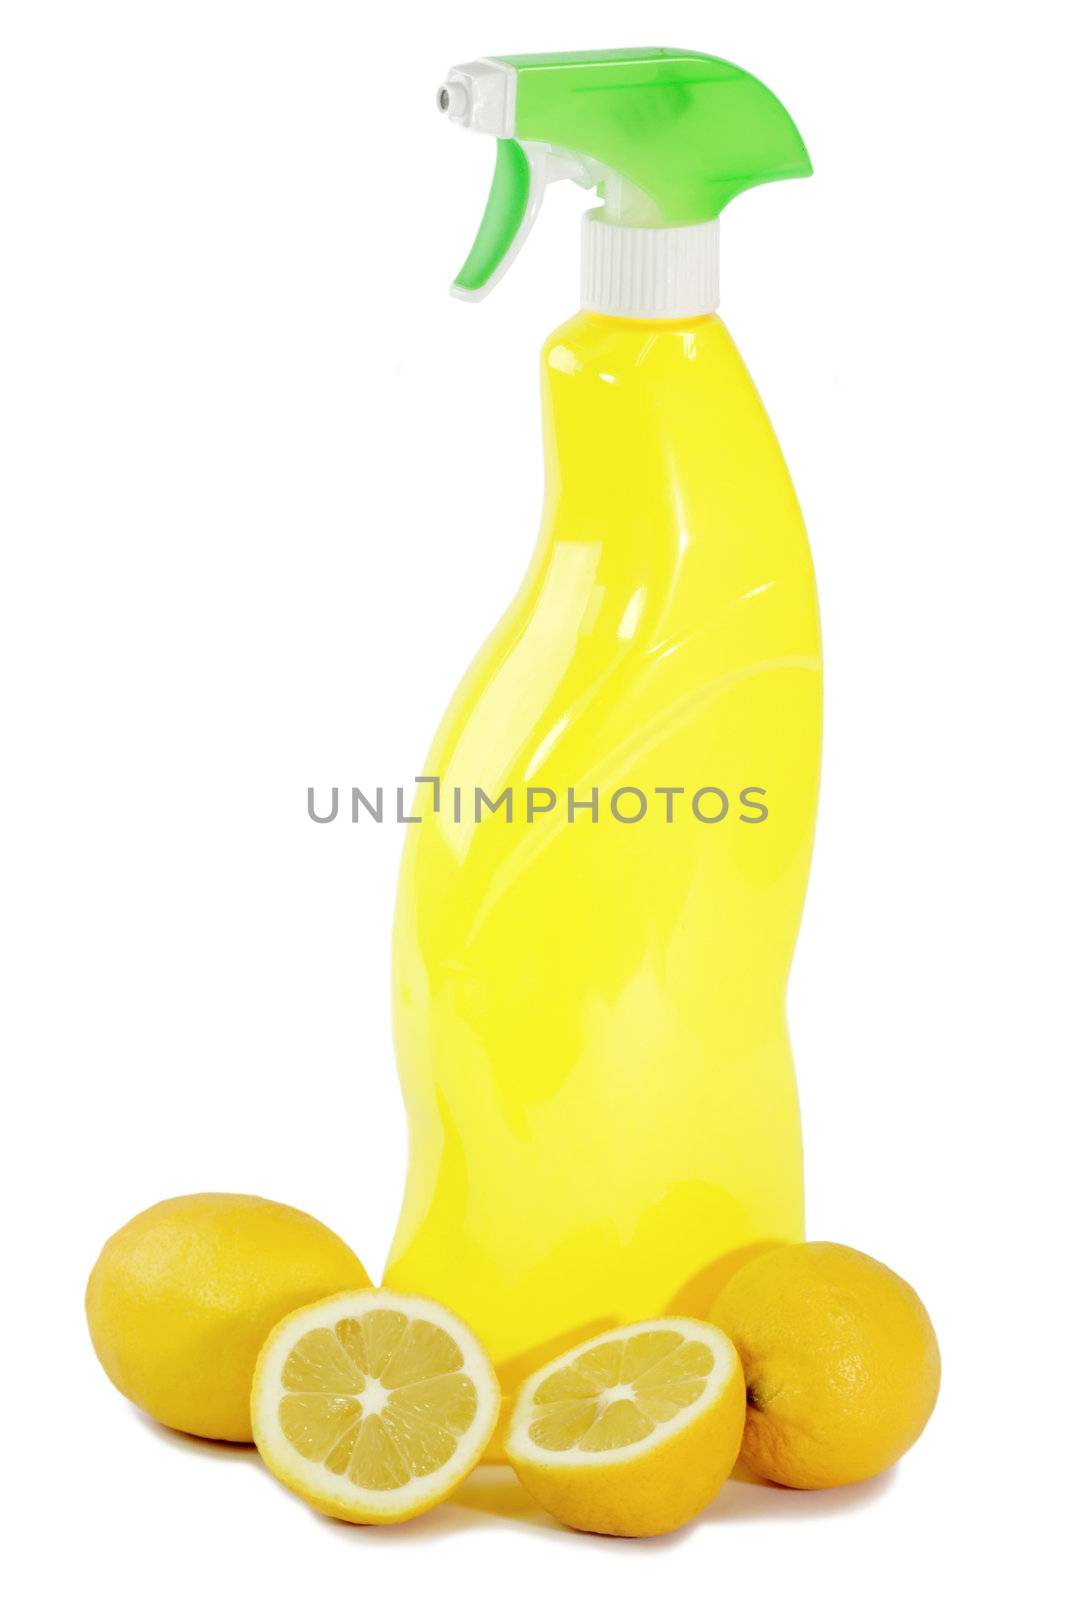 A yellow bottle of household cleaner spray with fresh lemons on bright background
